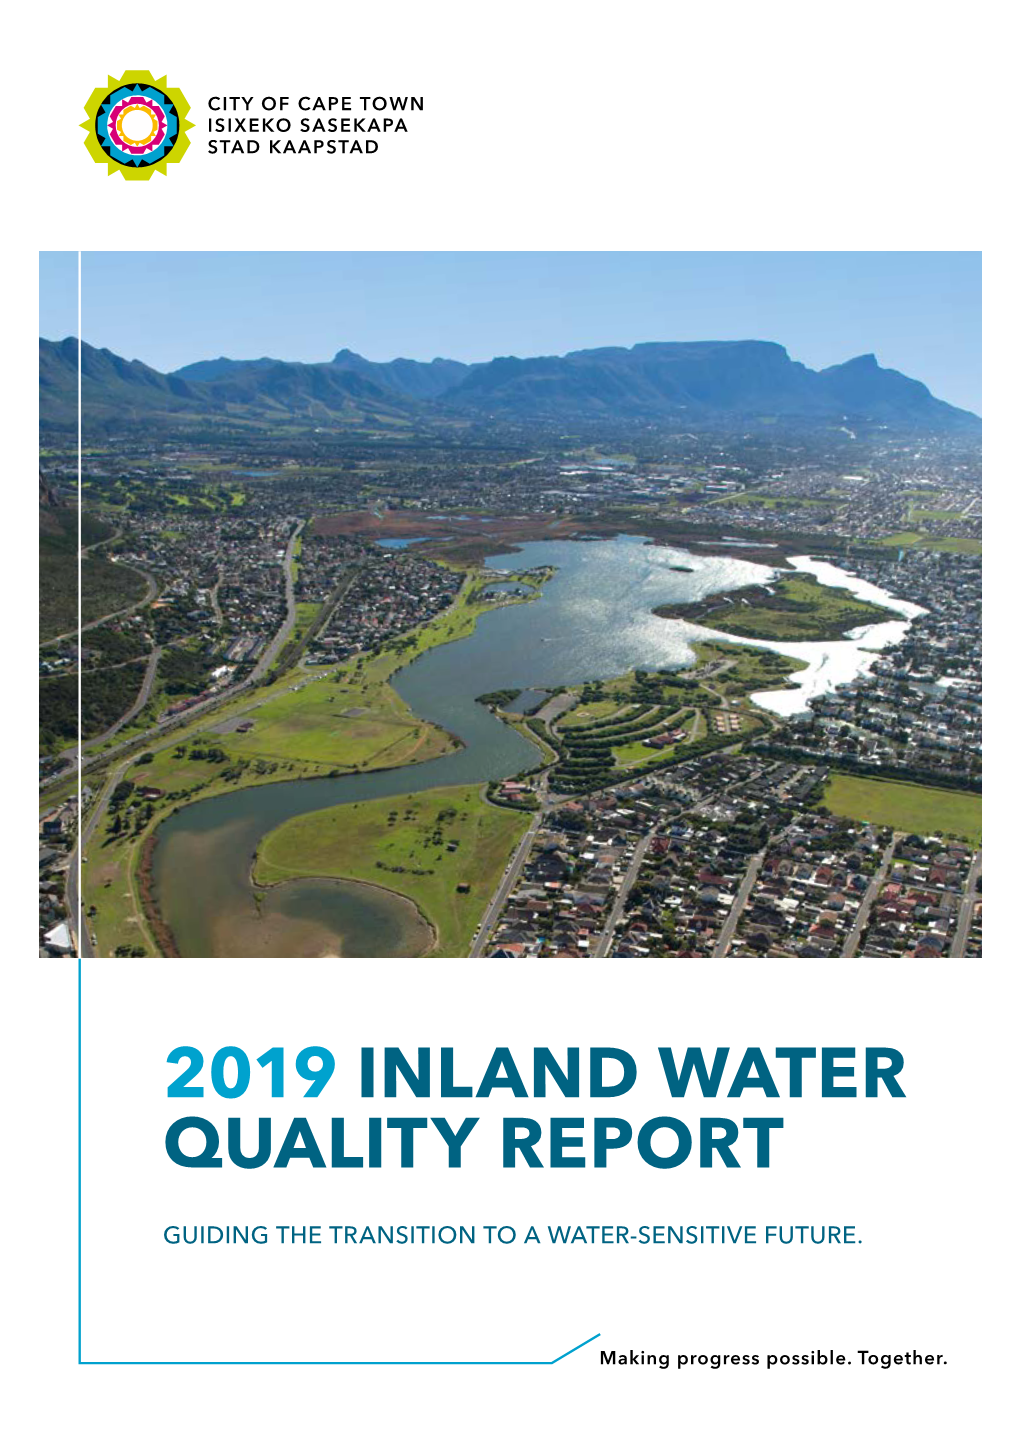 Inland Water Quality Report Summary